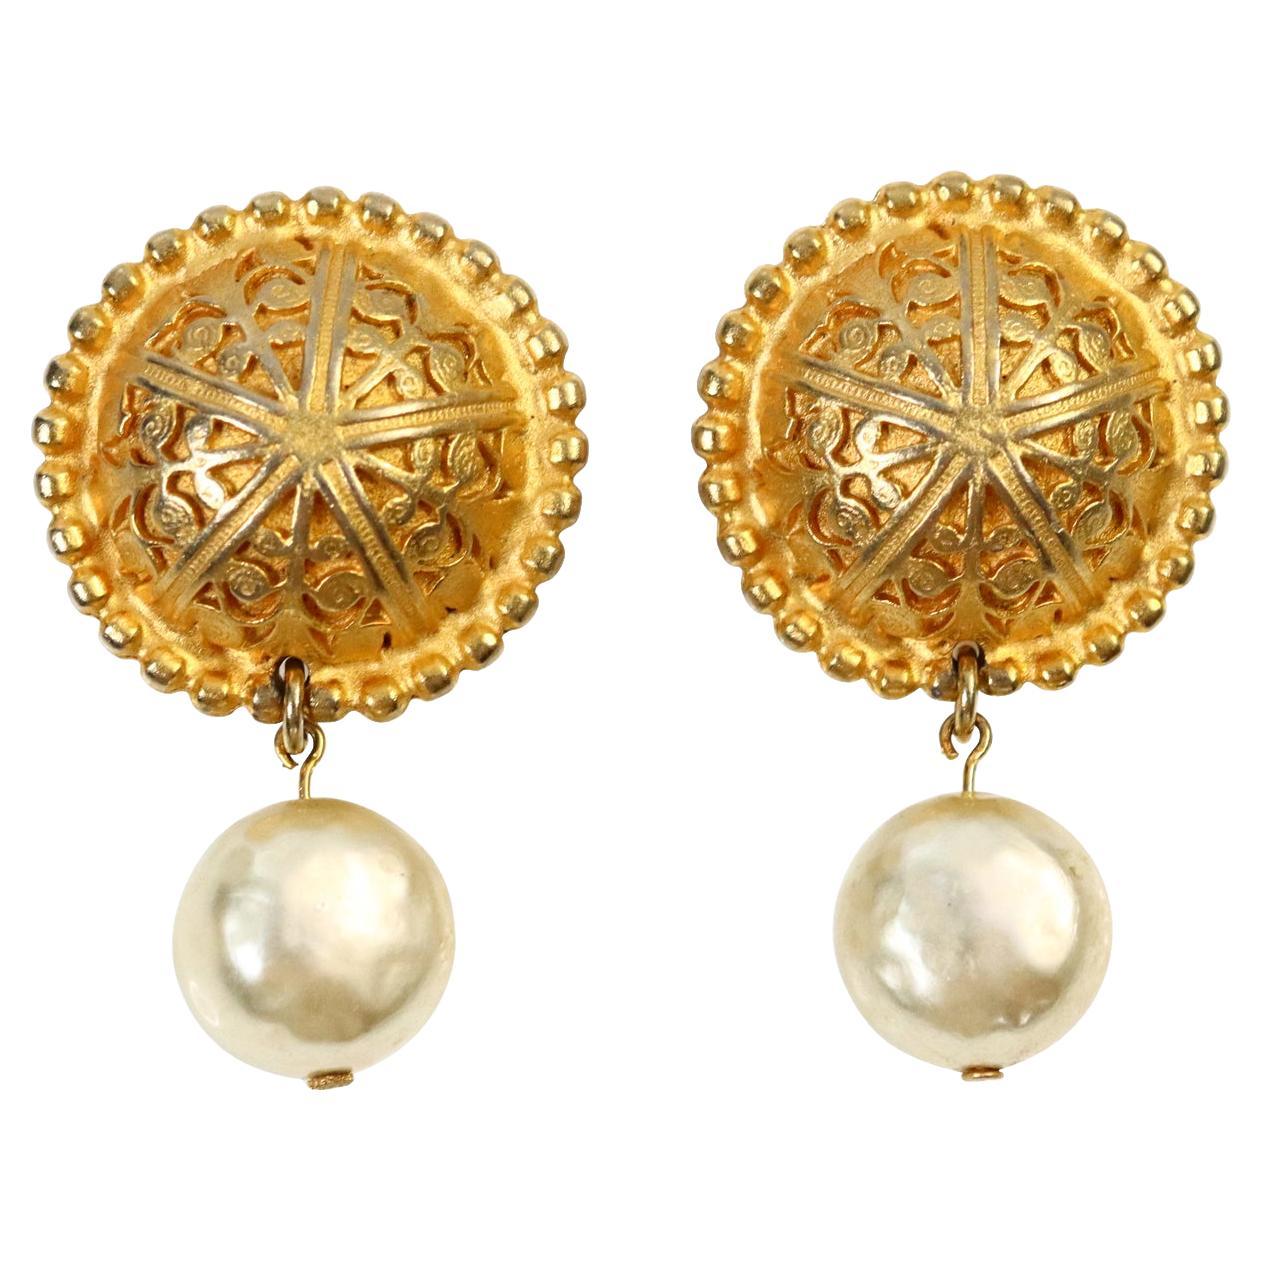 Vintage EP Gold Byzantine with Faux Dangling Pearl Earrings Circa 1980s